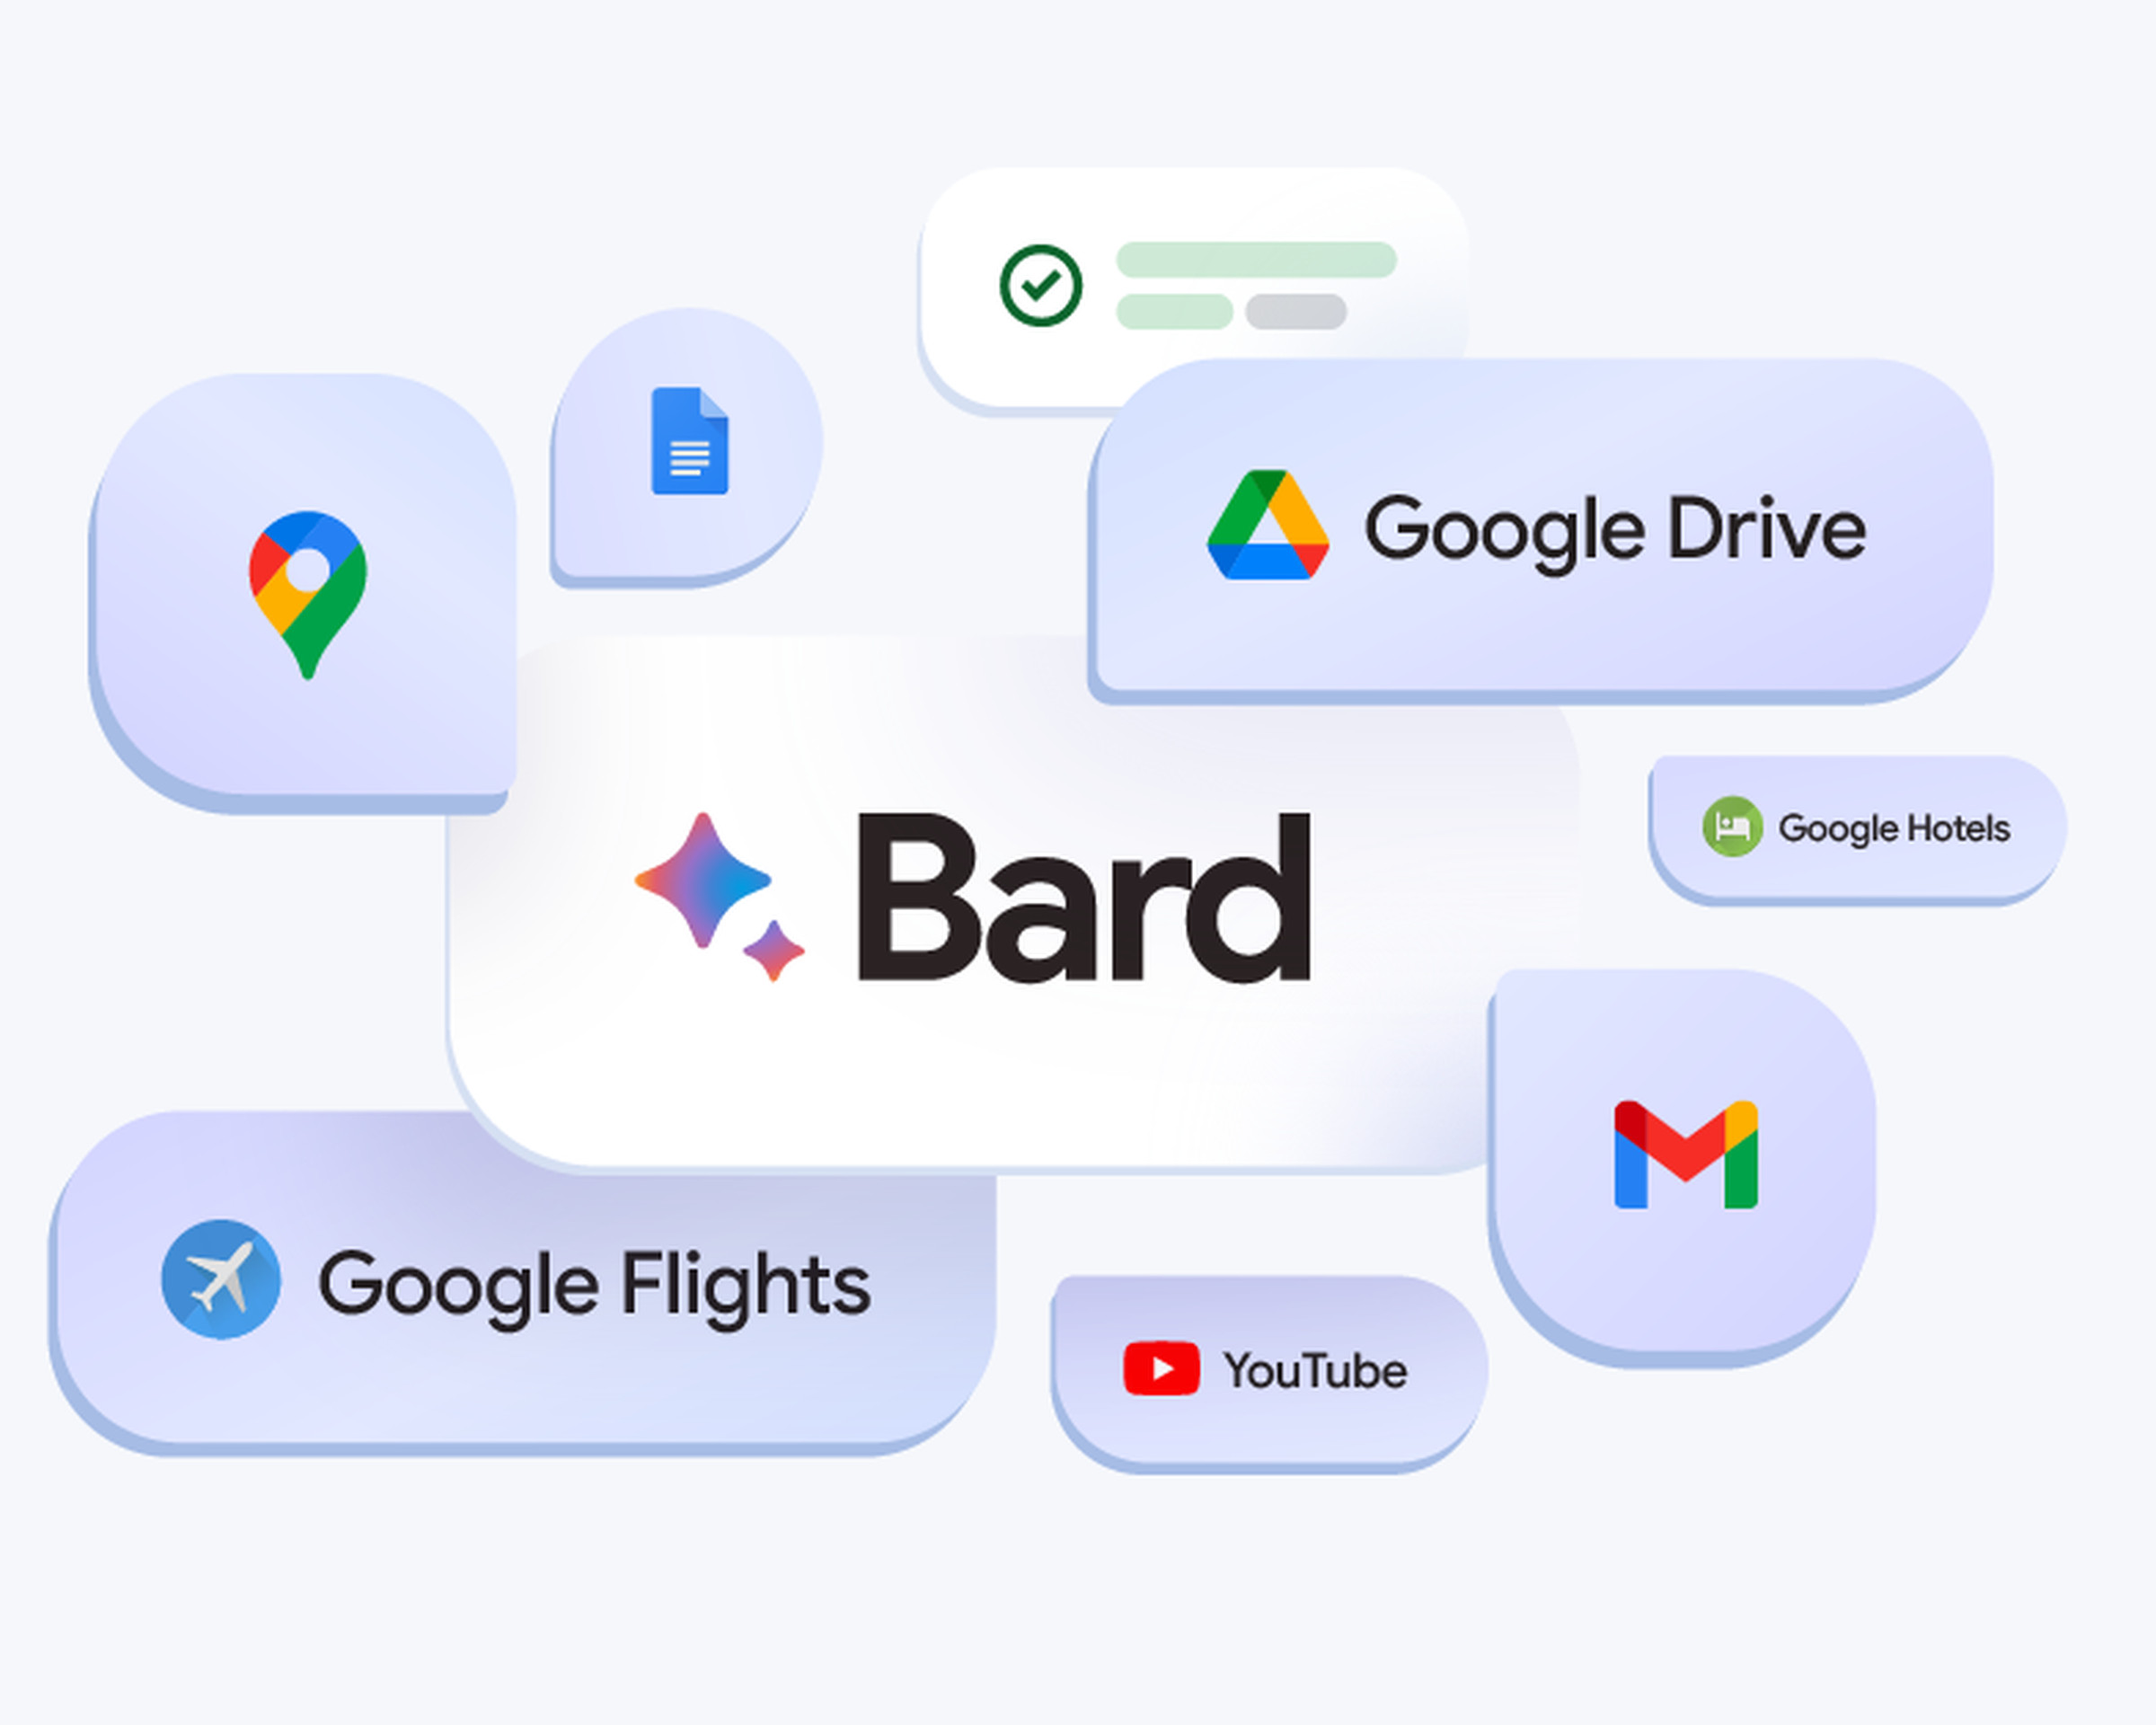 A graphic showing Bard’s logo with Gmail, Drive, Docs, and other apps